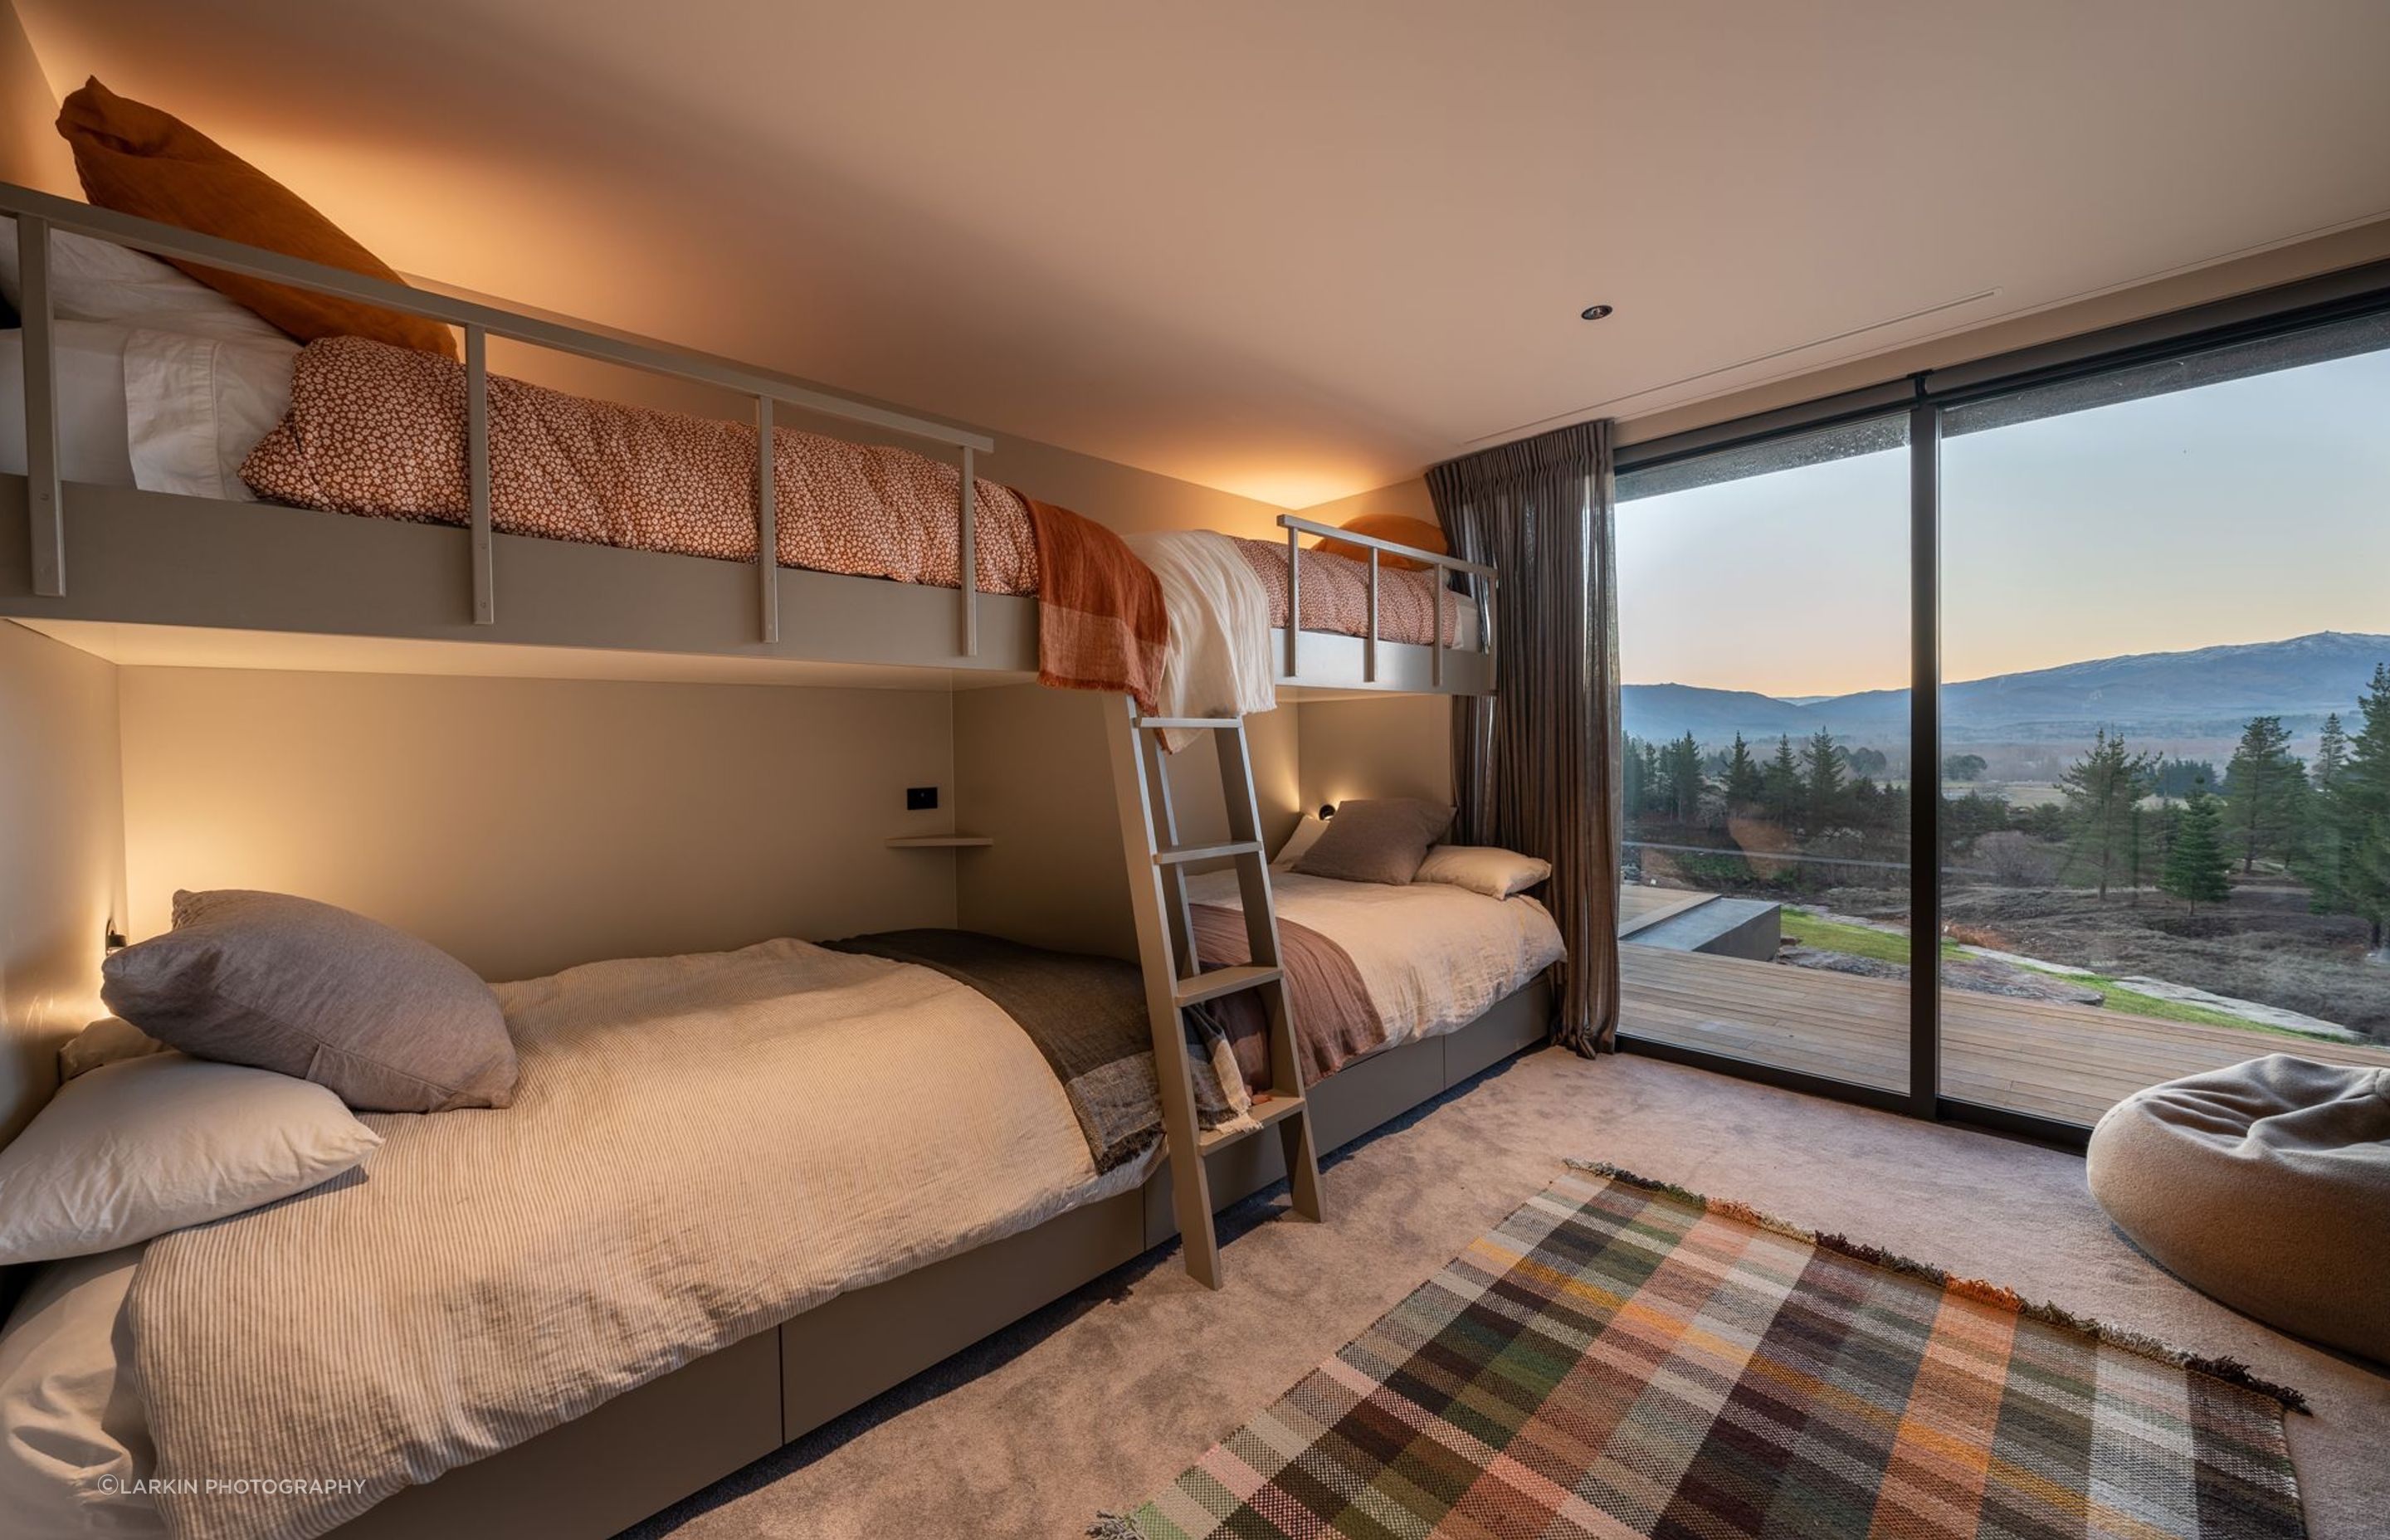 In the guest/family wing, a sumptuous bunkroom is perfect for the kids to pile into.